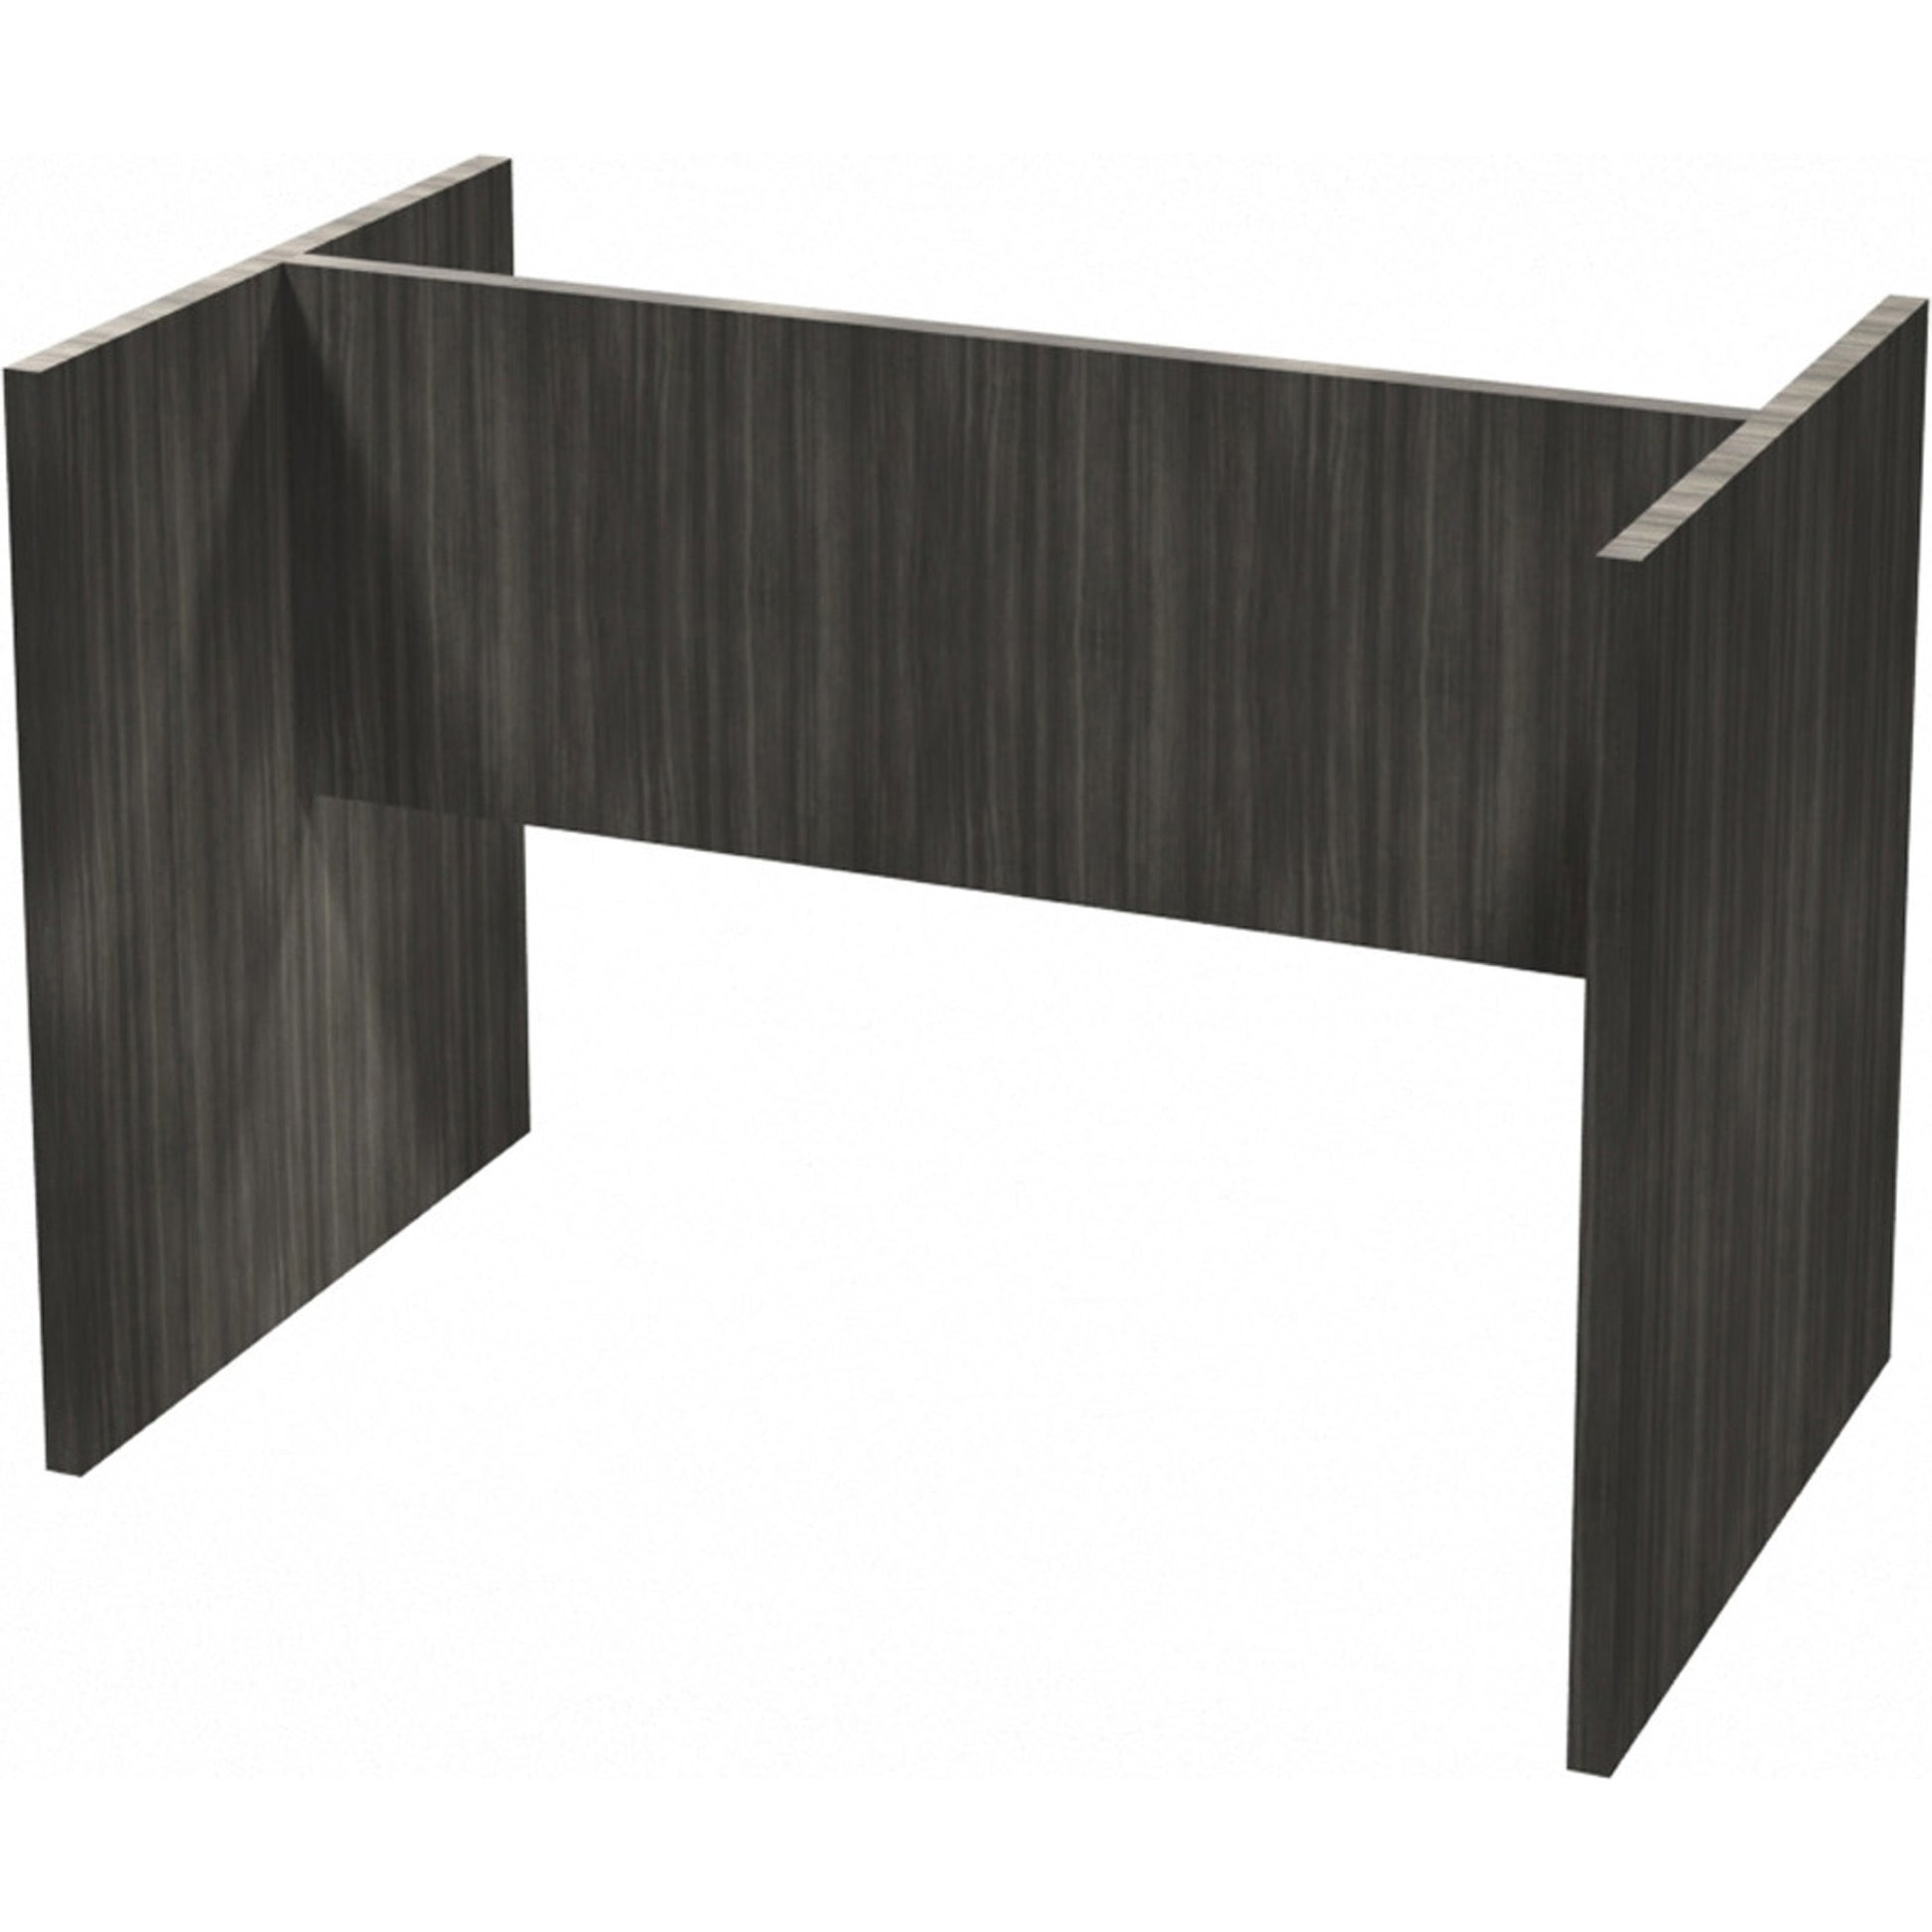 Heartwood Small Grey Racetrack Conference Table